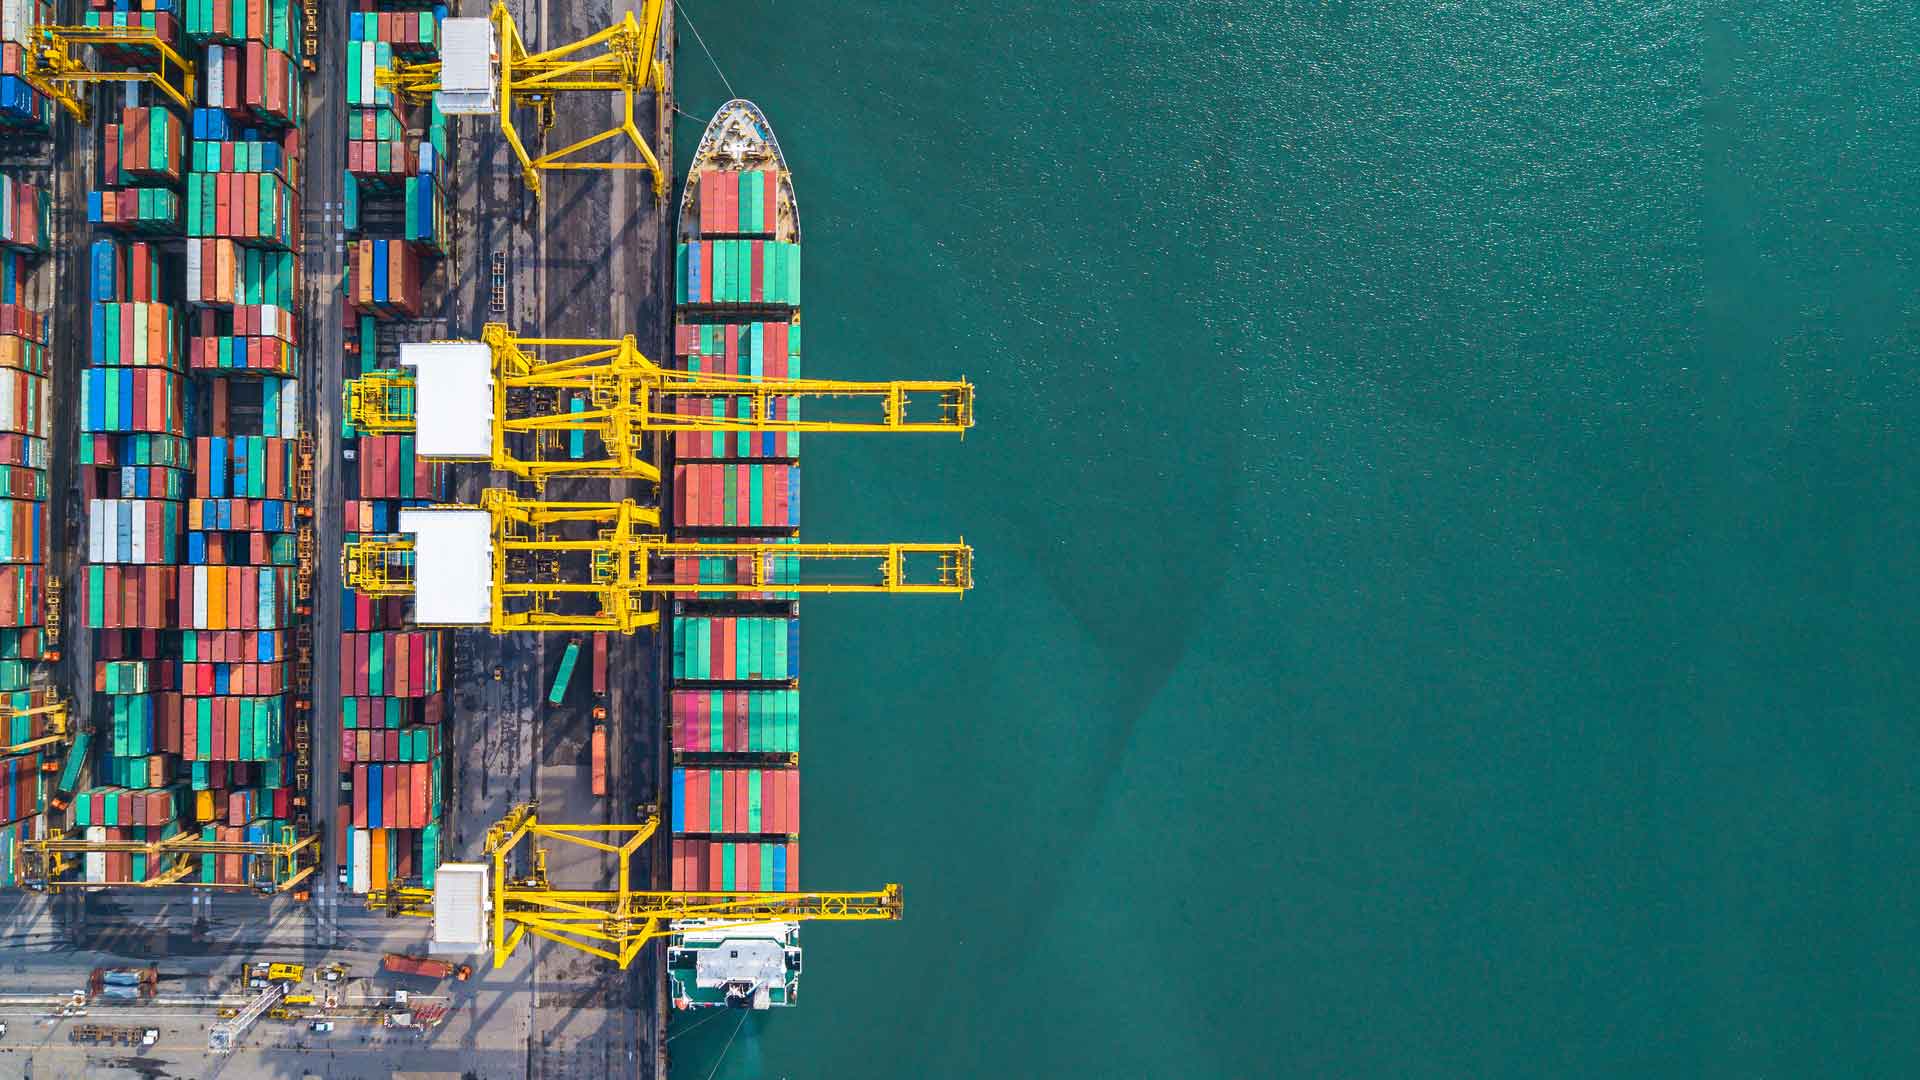 aerial view of ship being loaded with colorful containers